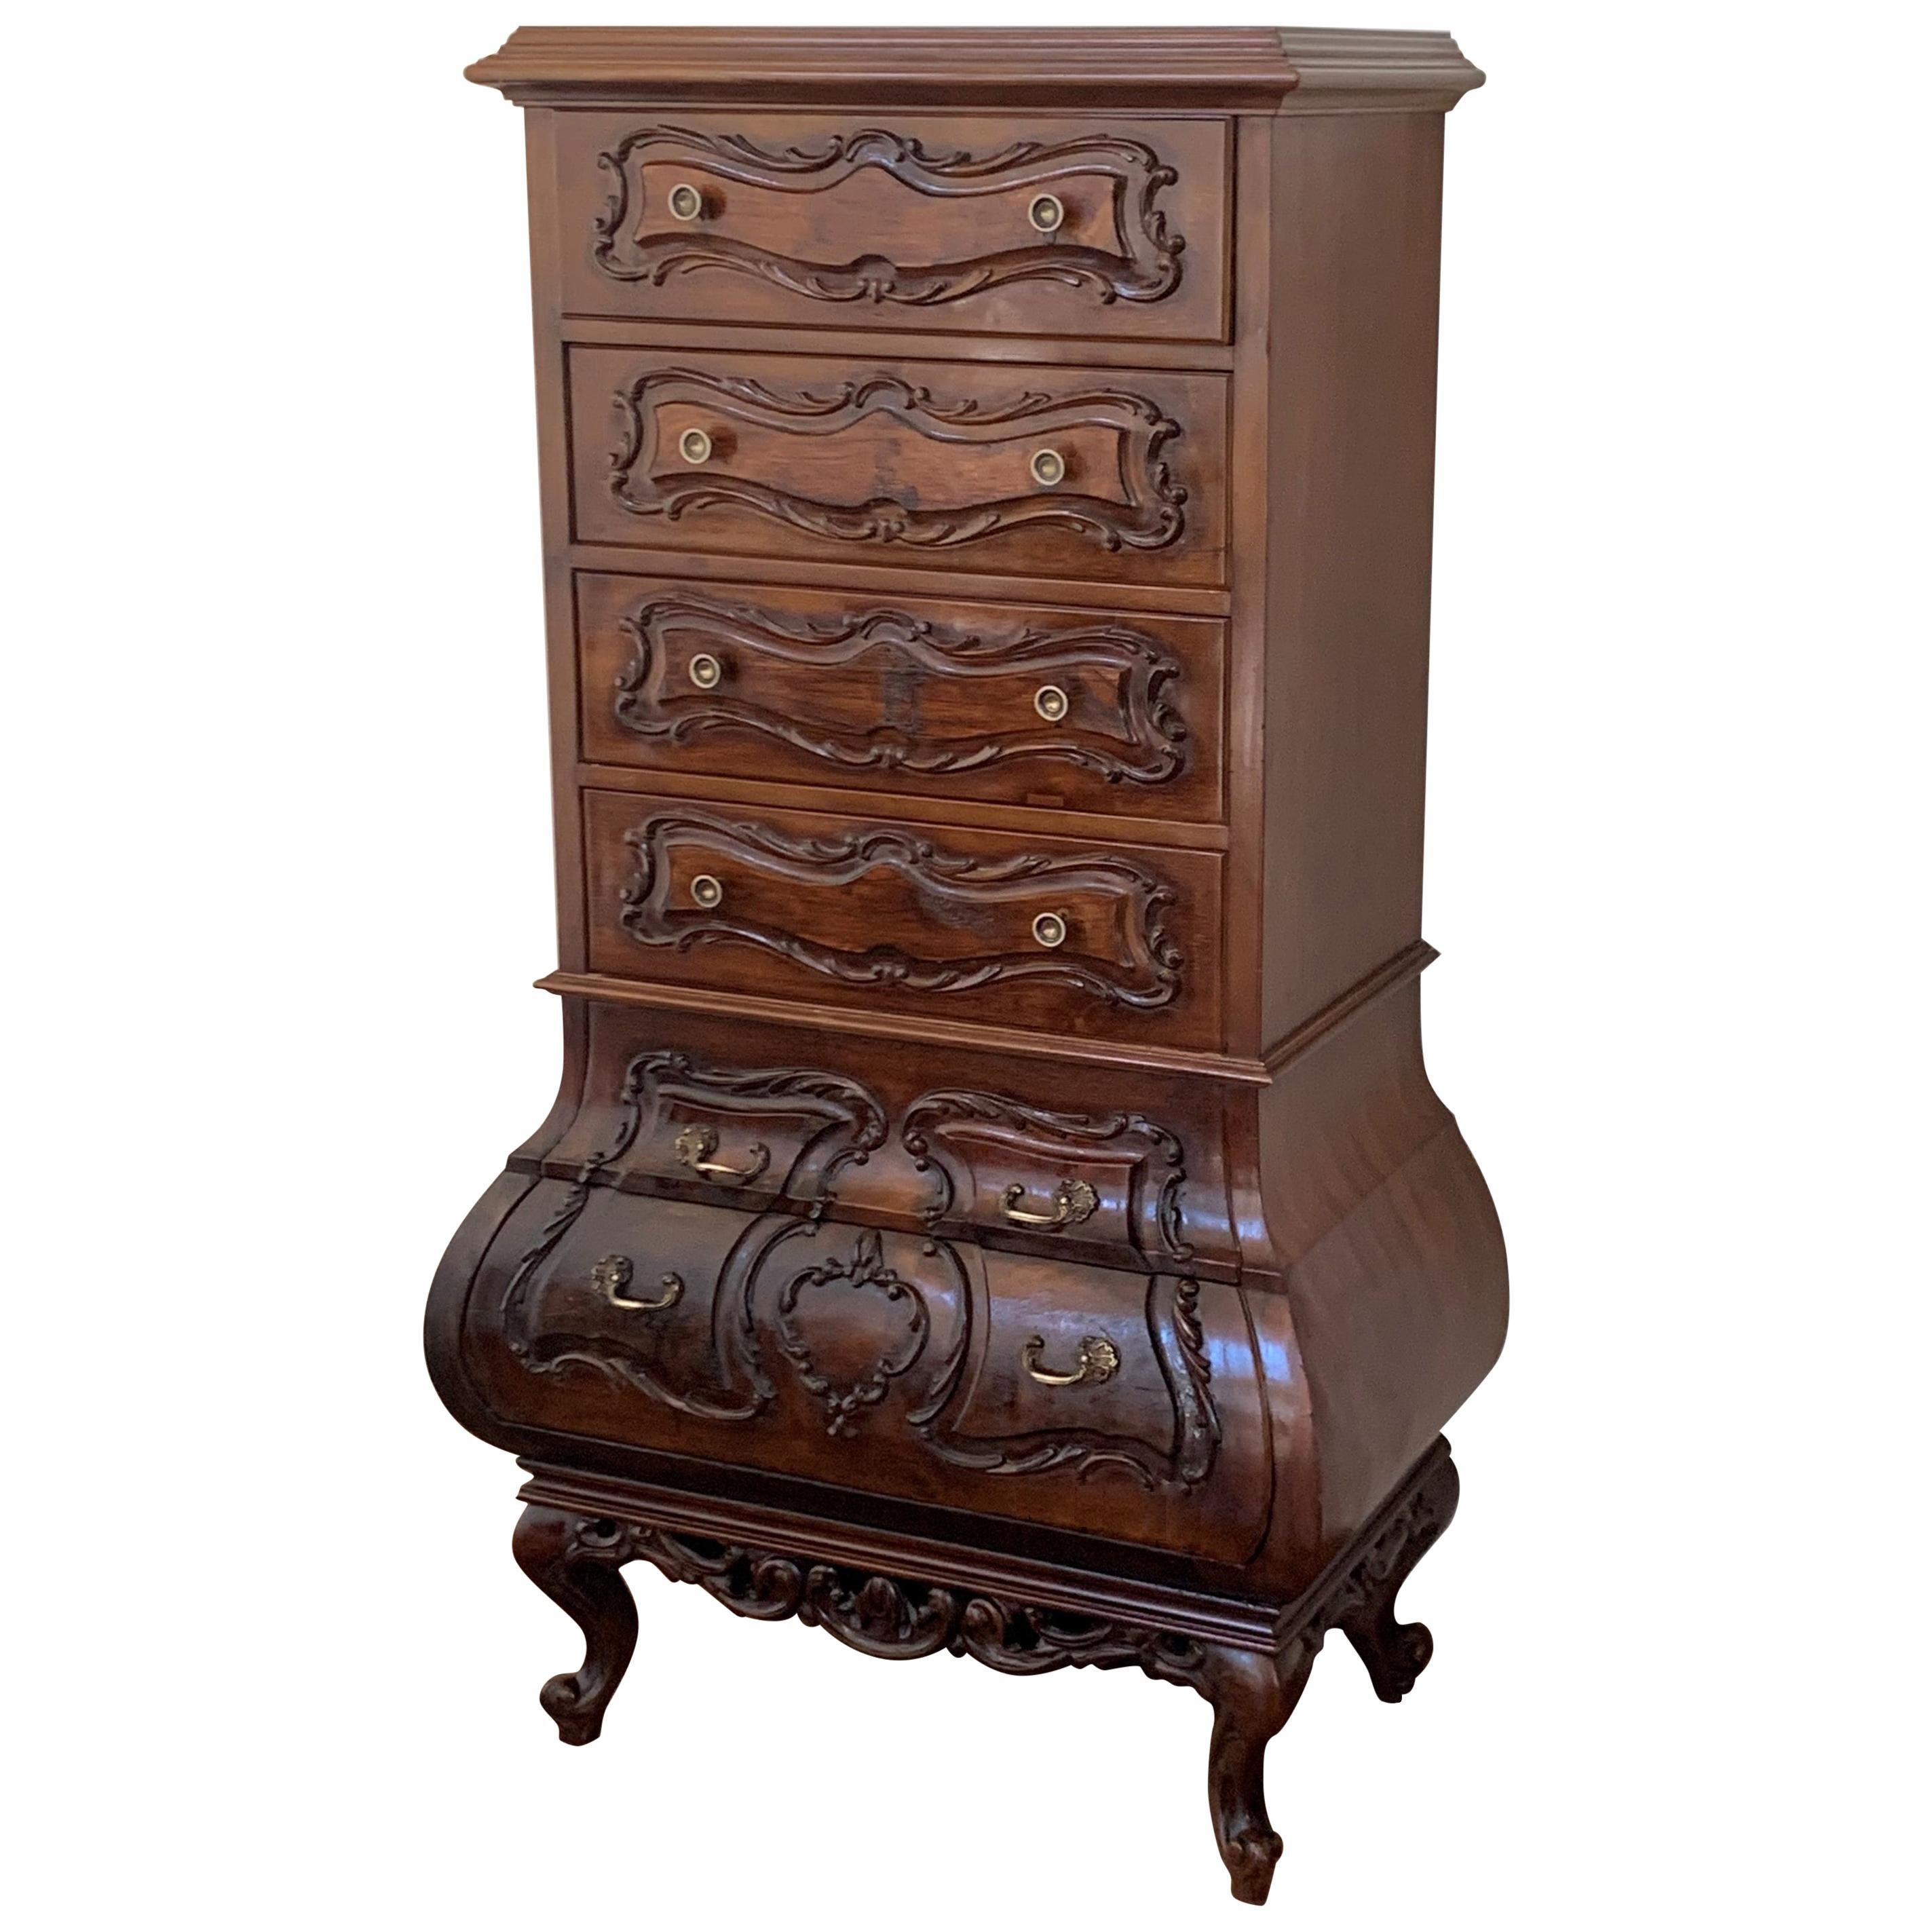 French Country Louis XV Style Carved "Bombe" Walnut Commode Chest of Drawers